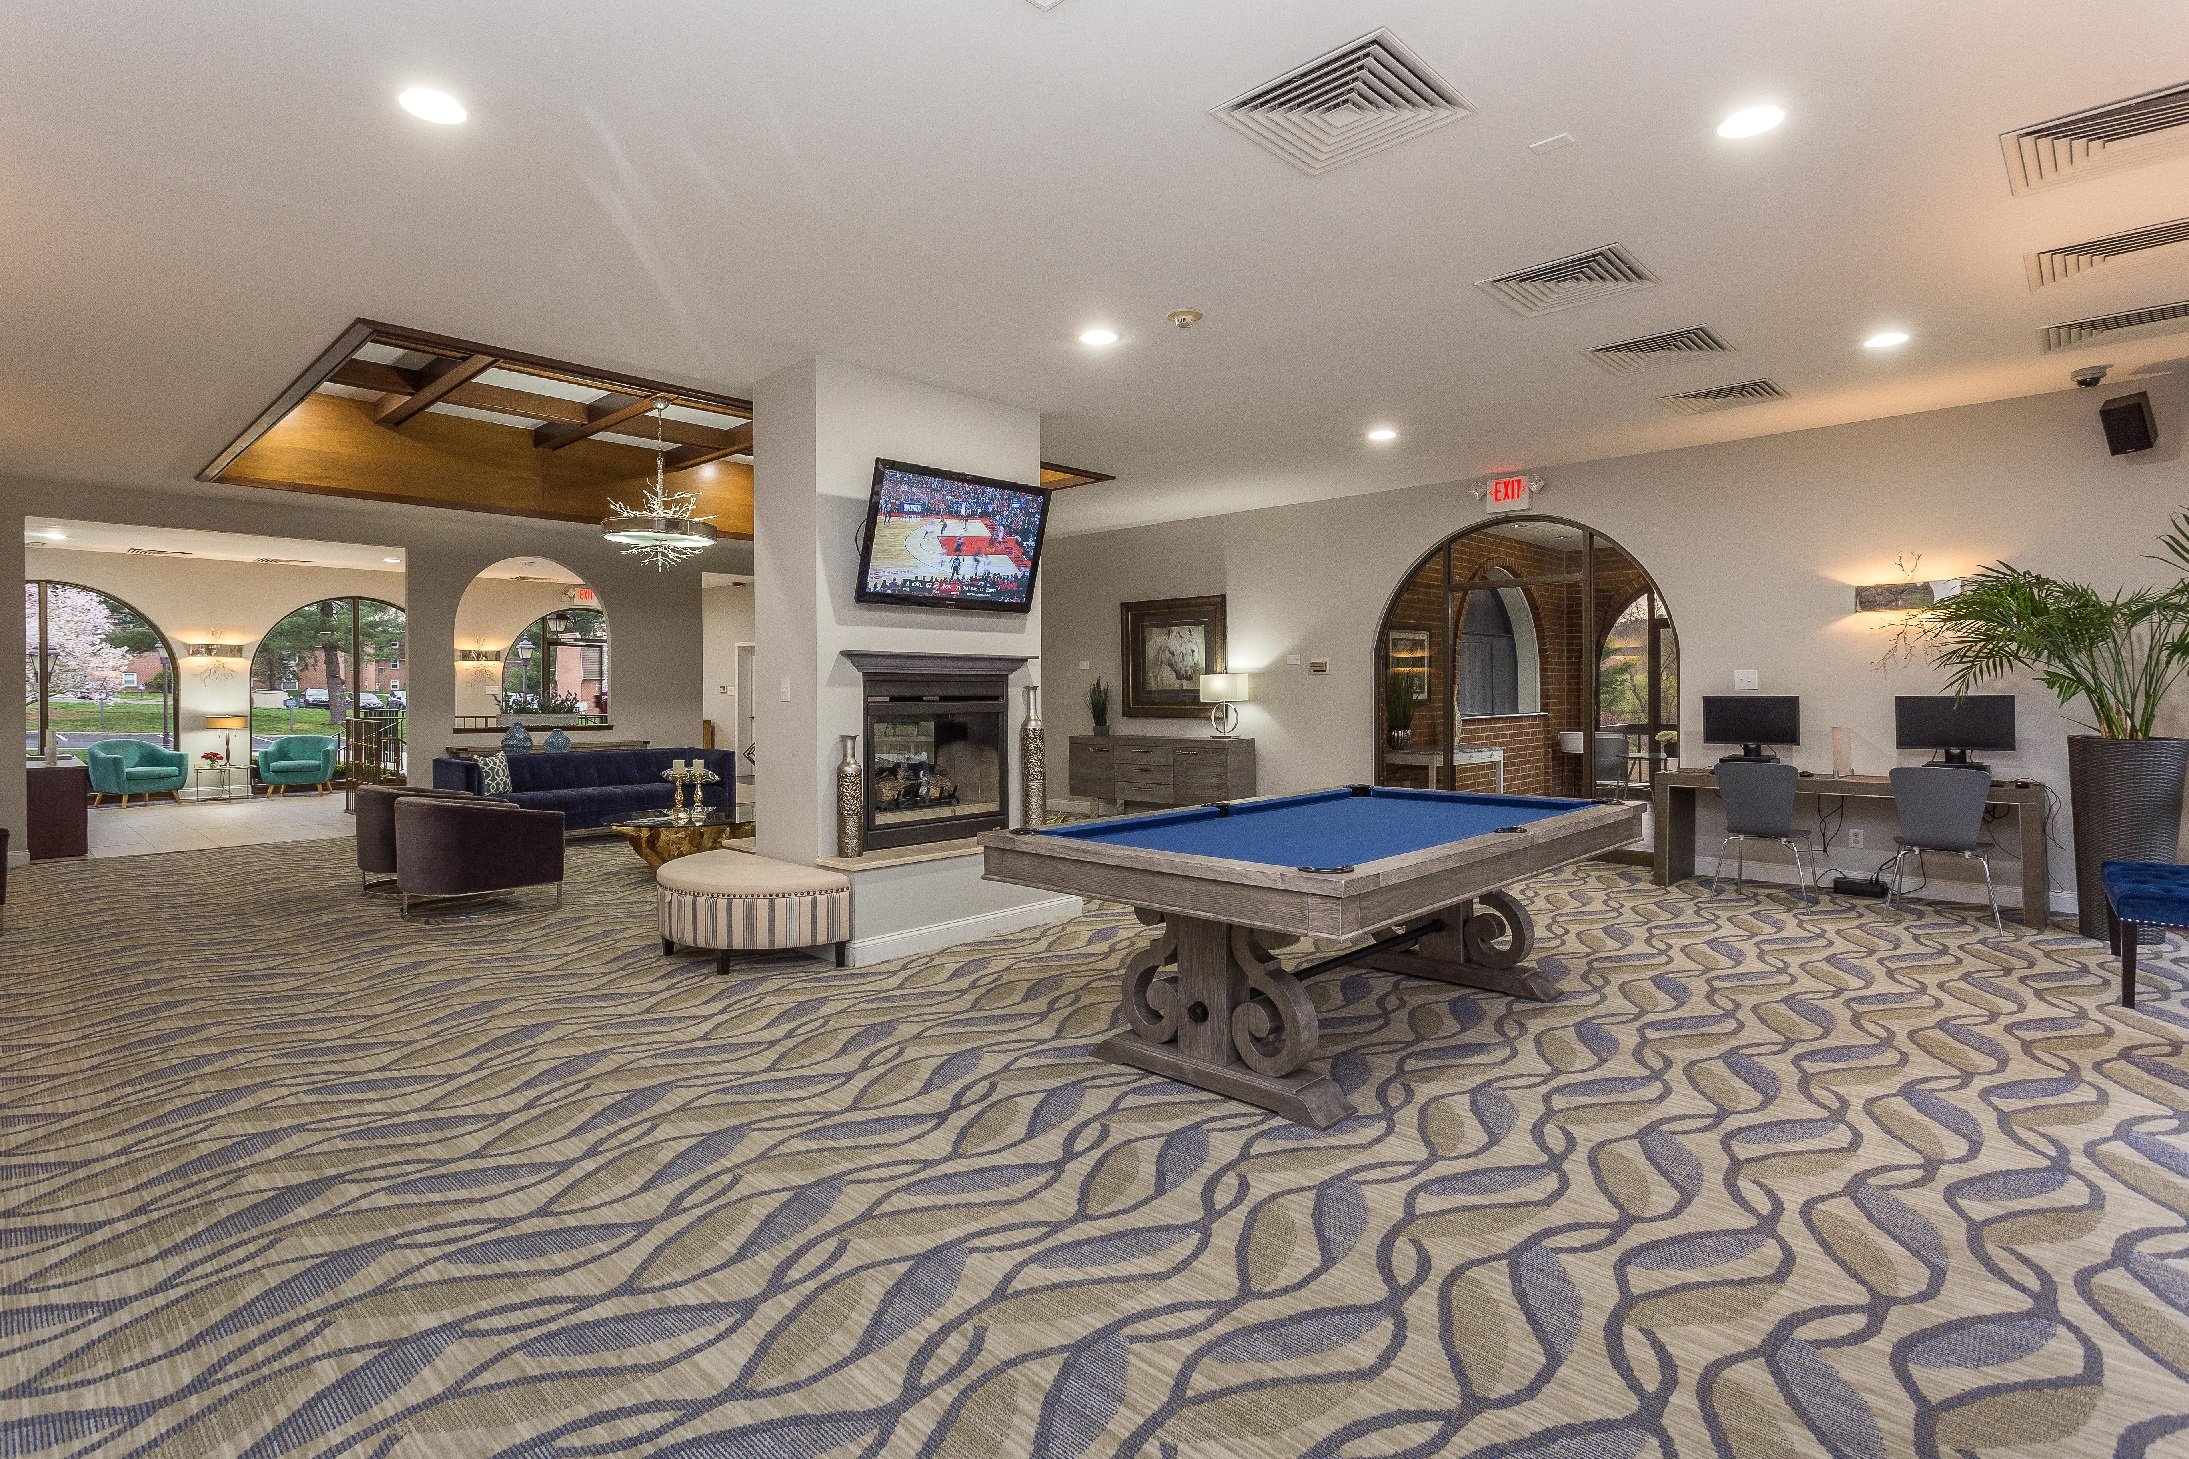 Club house furnished with television set, pool table, and seating.